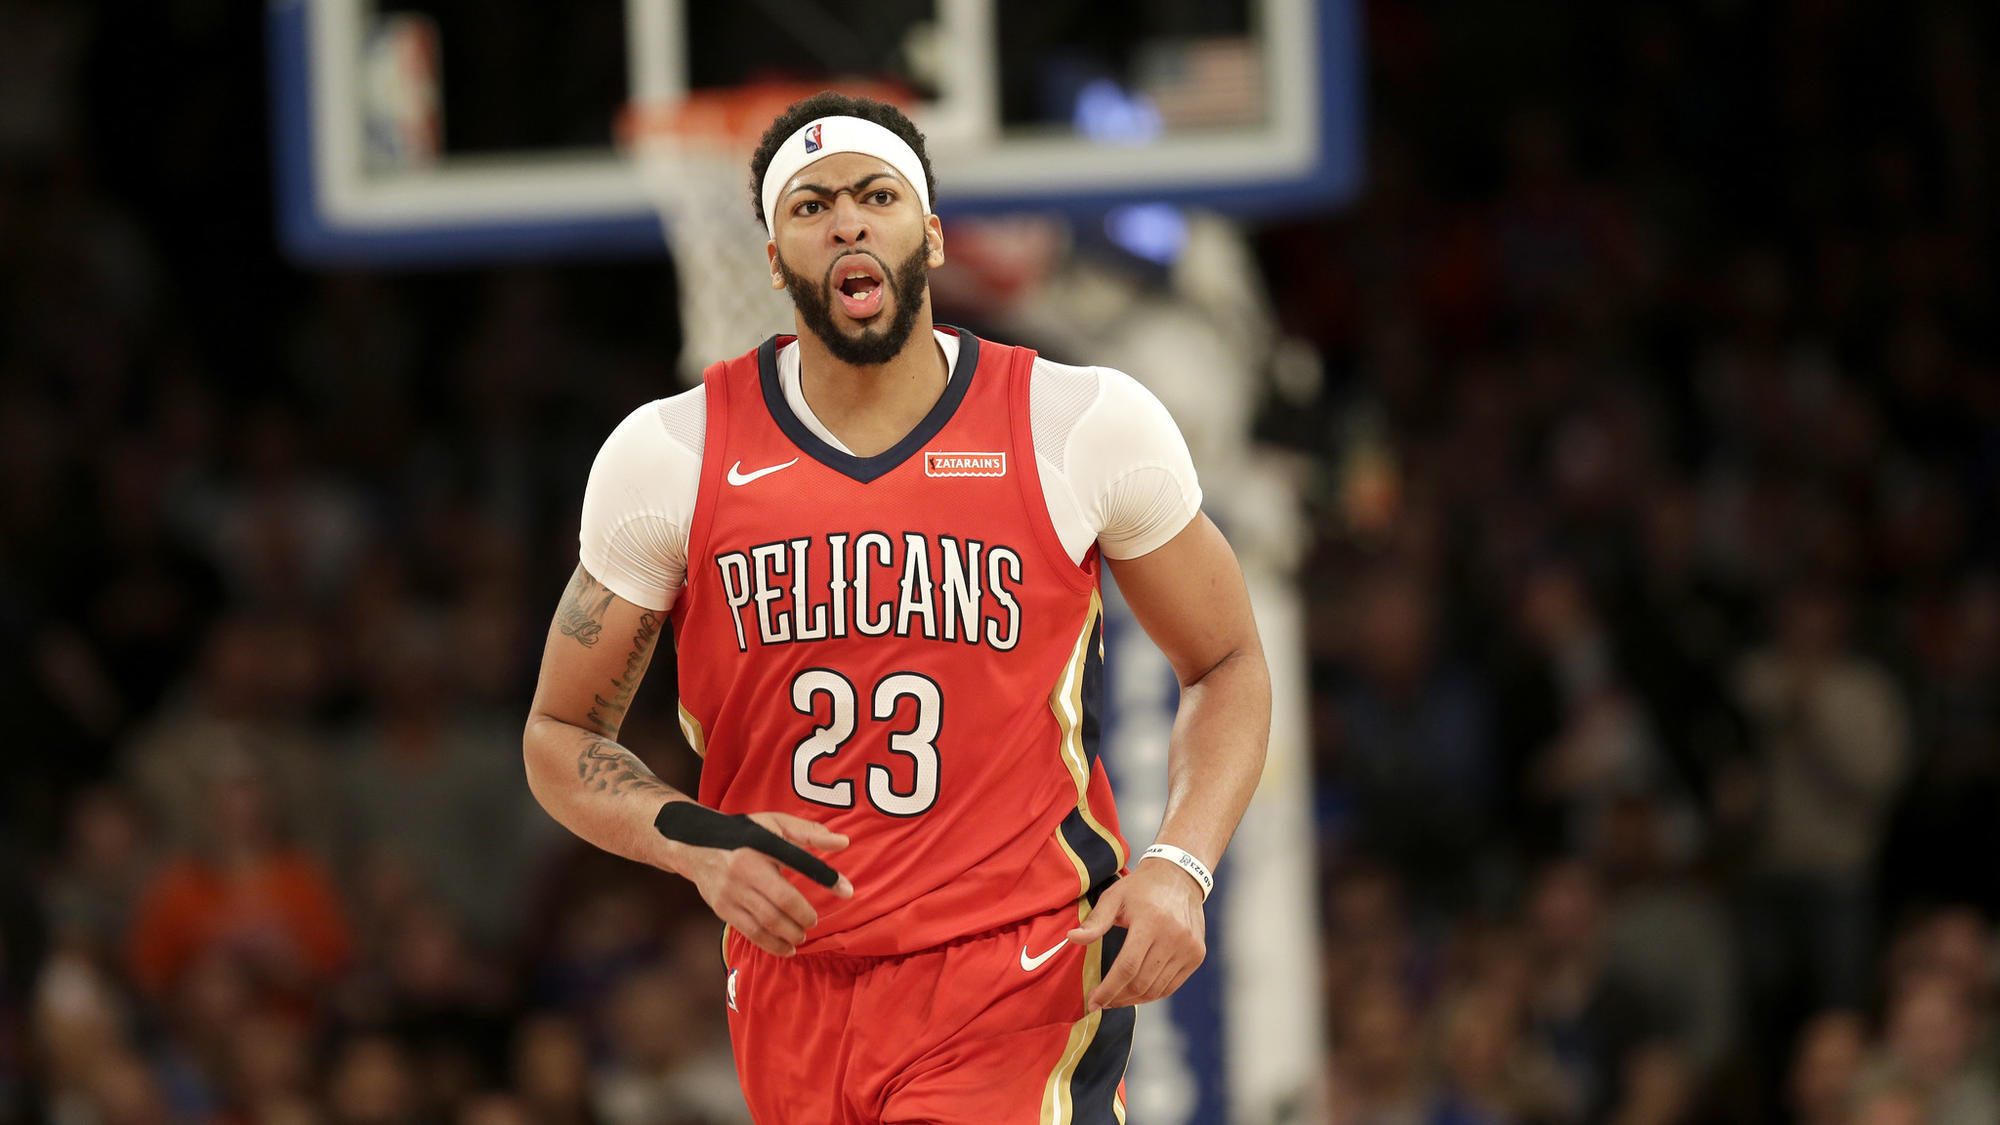 Trending in the NBA: Anthony Davis trade rumors and a Joel Embiid date with Rihanna ...2000 x 1125